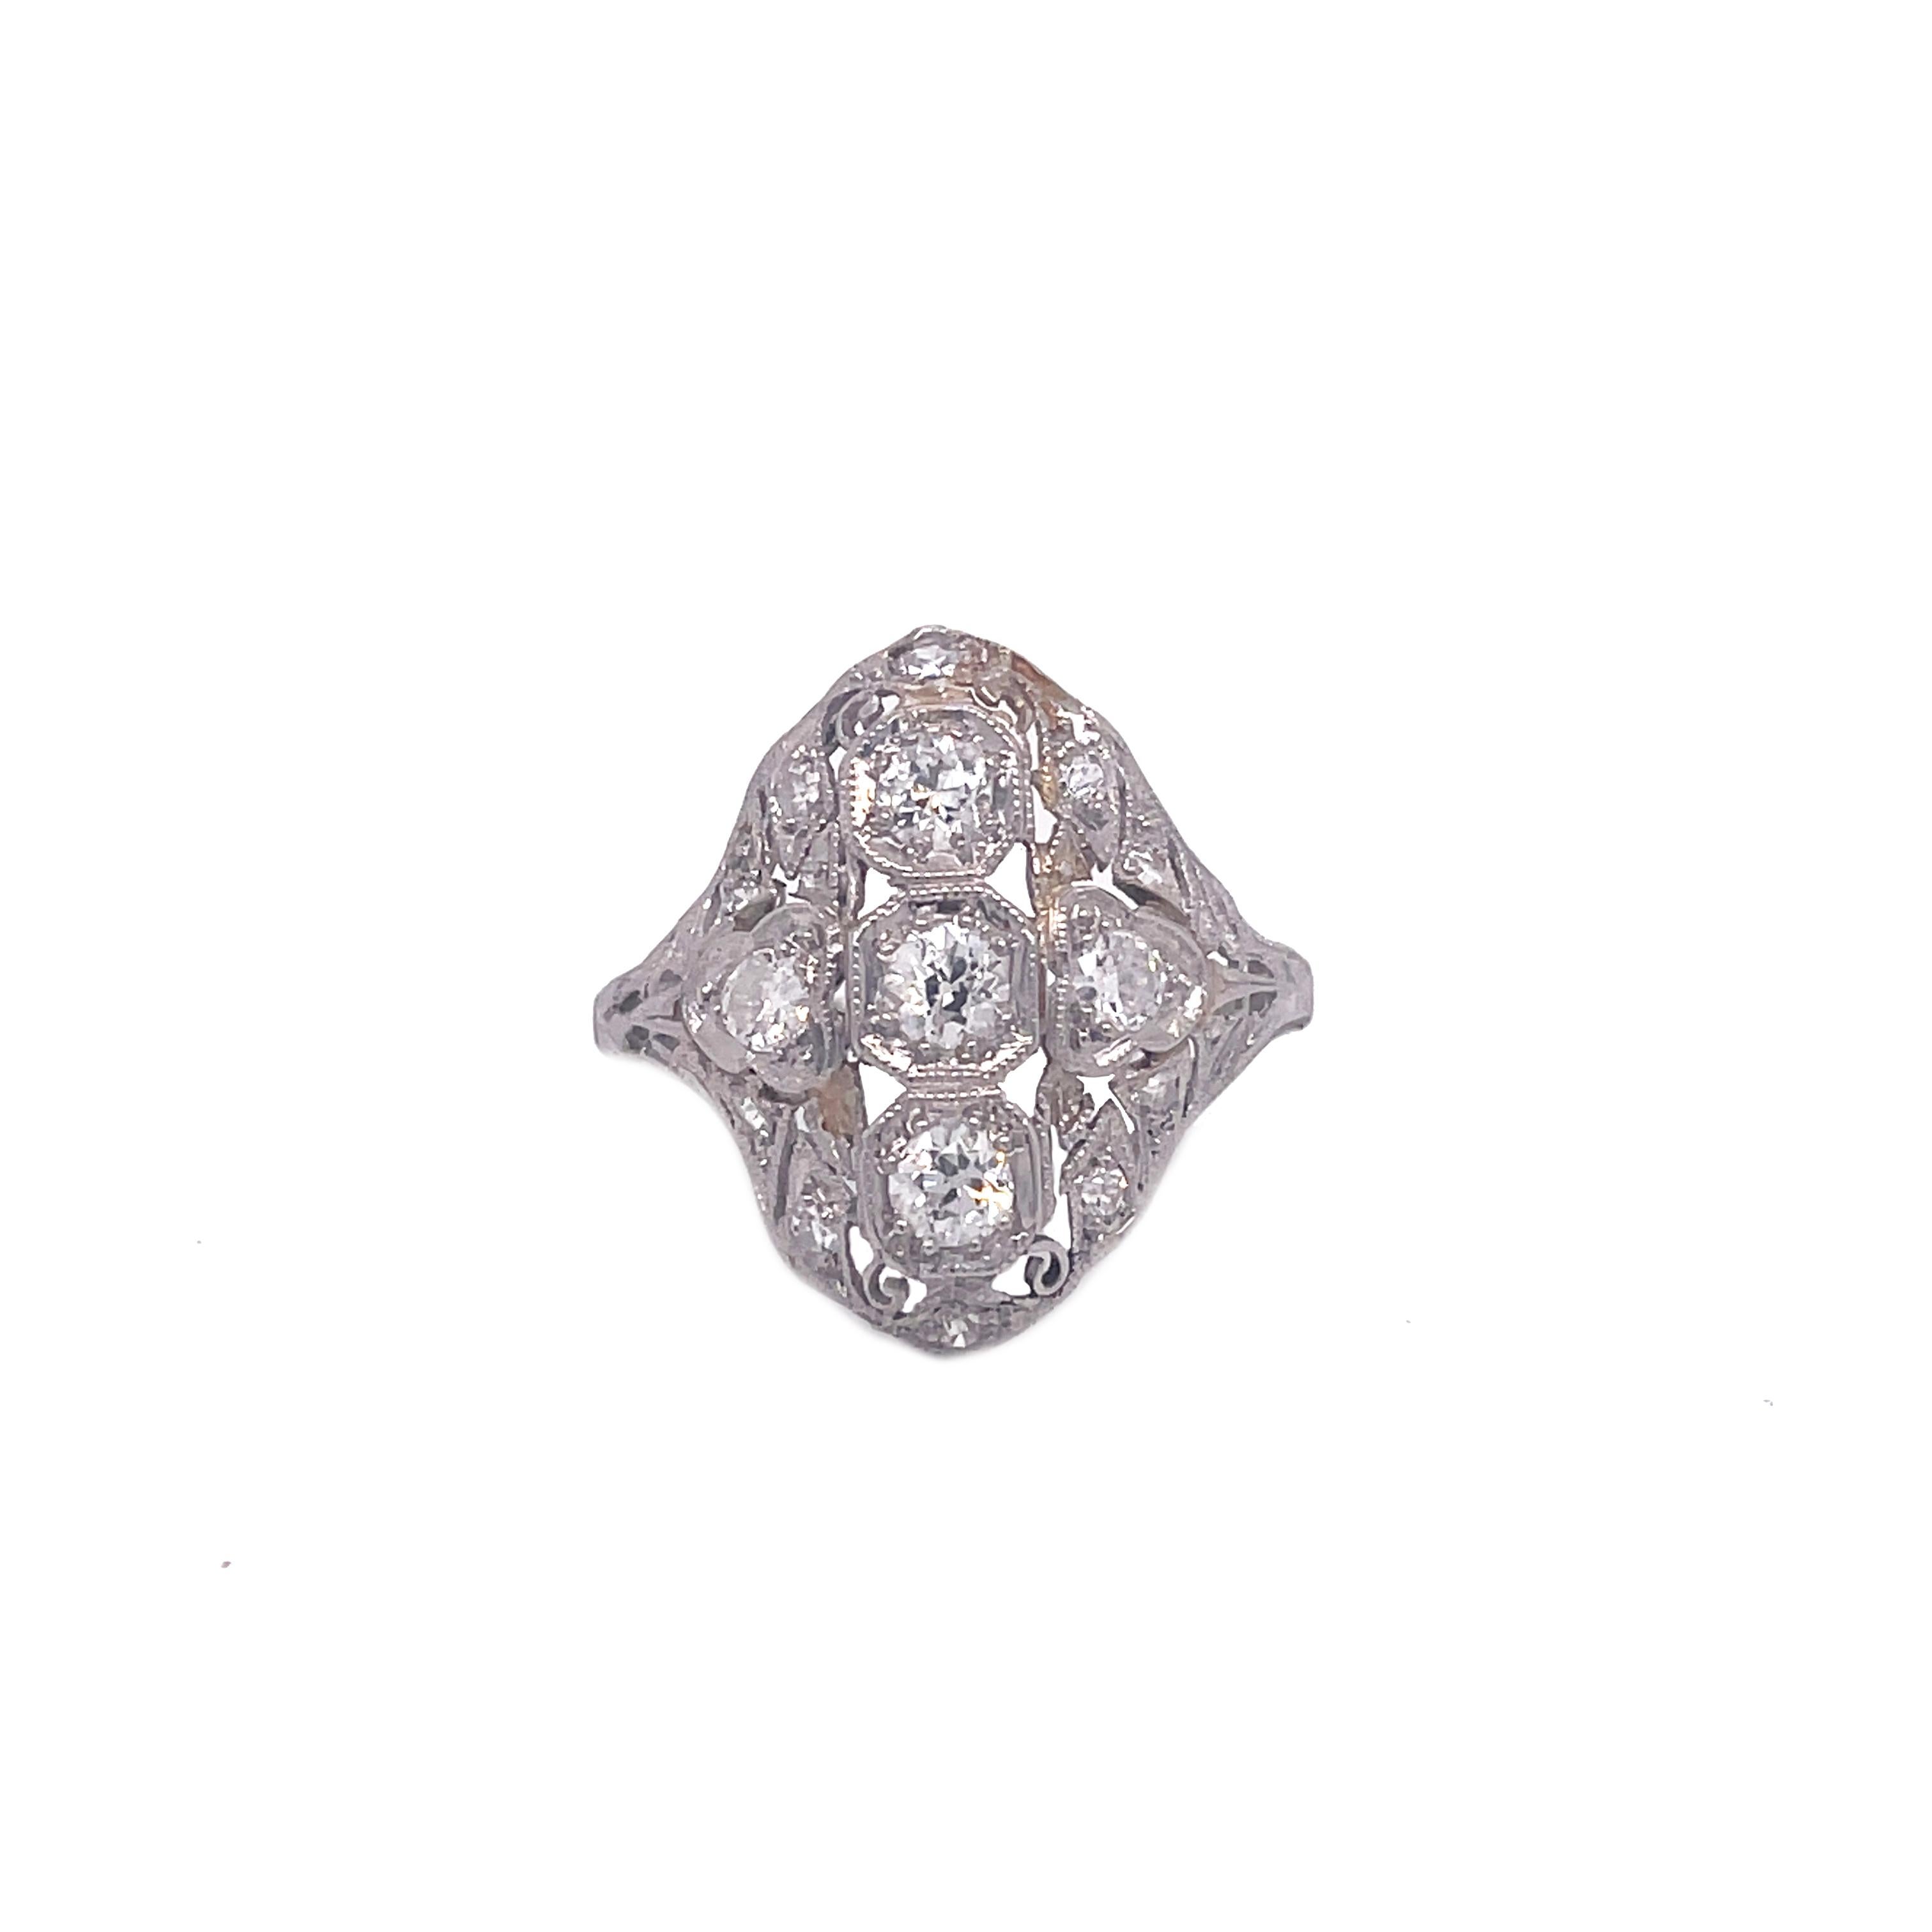 This 1910 Edwardian ring is the definition of dreamy, from the dazzling old mine-cut diamonds to the intricate platinum filigree, this ring is breathtaking. The ring is adorned with 5 brilliant old mine-cut diamonds that sparkle from tables away.